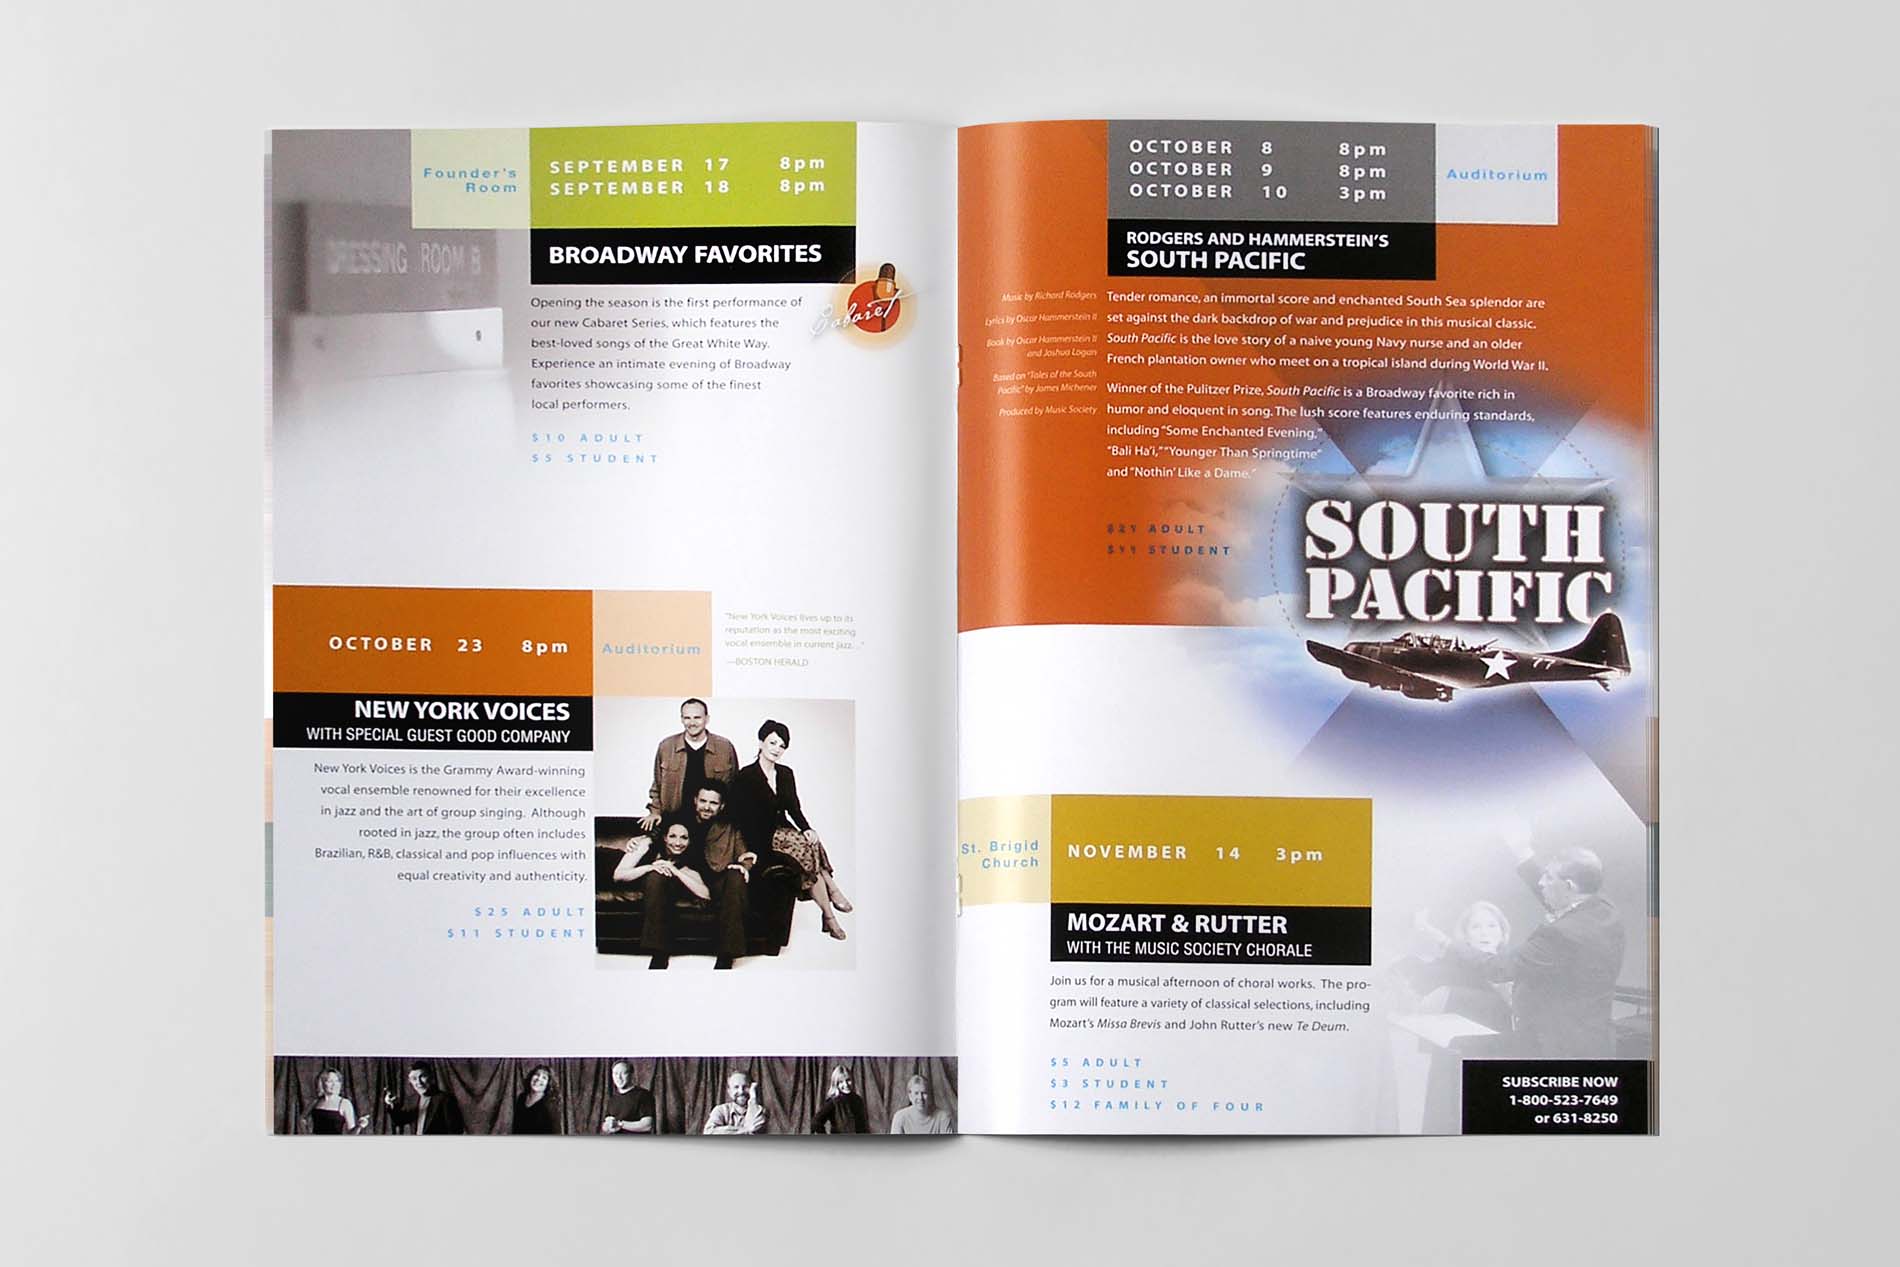 ip Music Society Midland Center for the Arts season catalog spread 2 mockup by Design Direction